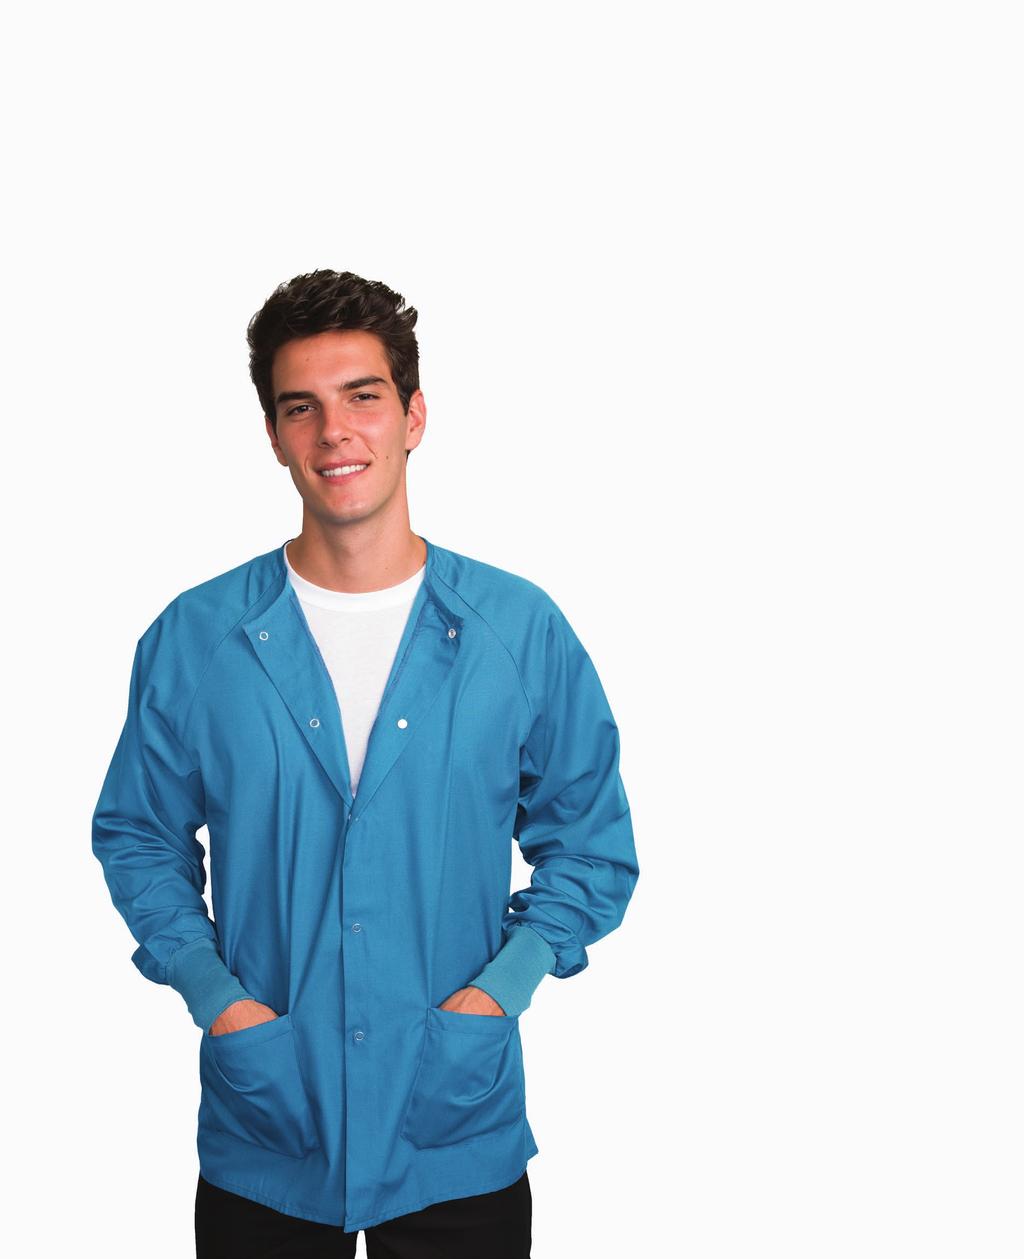 Collection Unisex Scrub Warm-Up Jacket Soft on both sides & delivers superior warmth Two roomy lower pockets to hold instruments Snap front closure Polyester = 65% and Cotton = 35% Style No.